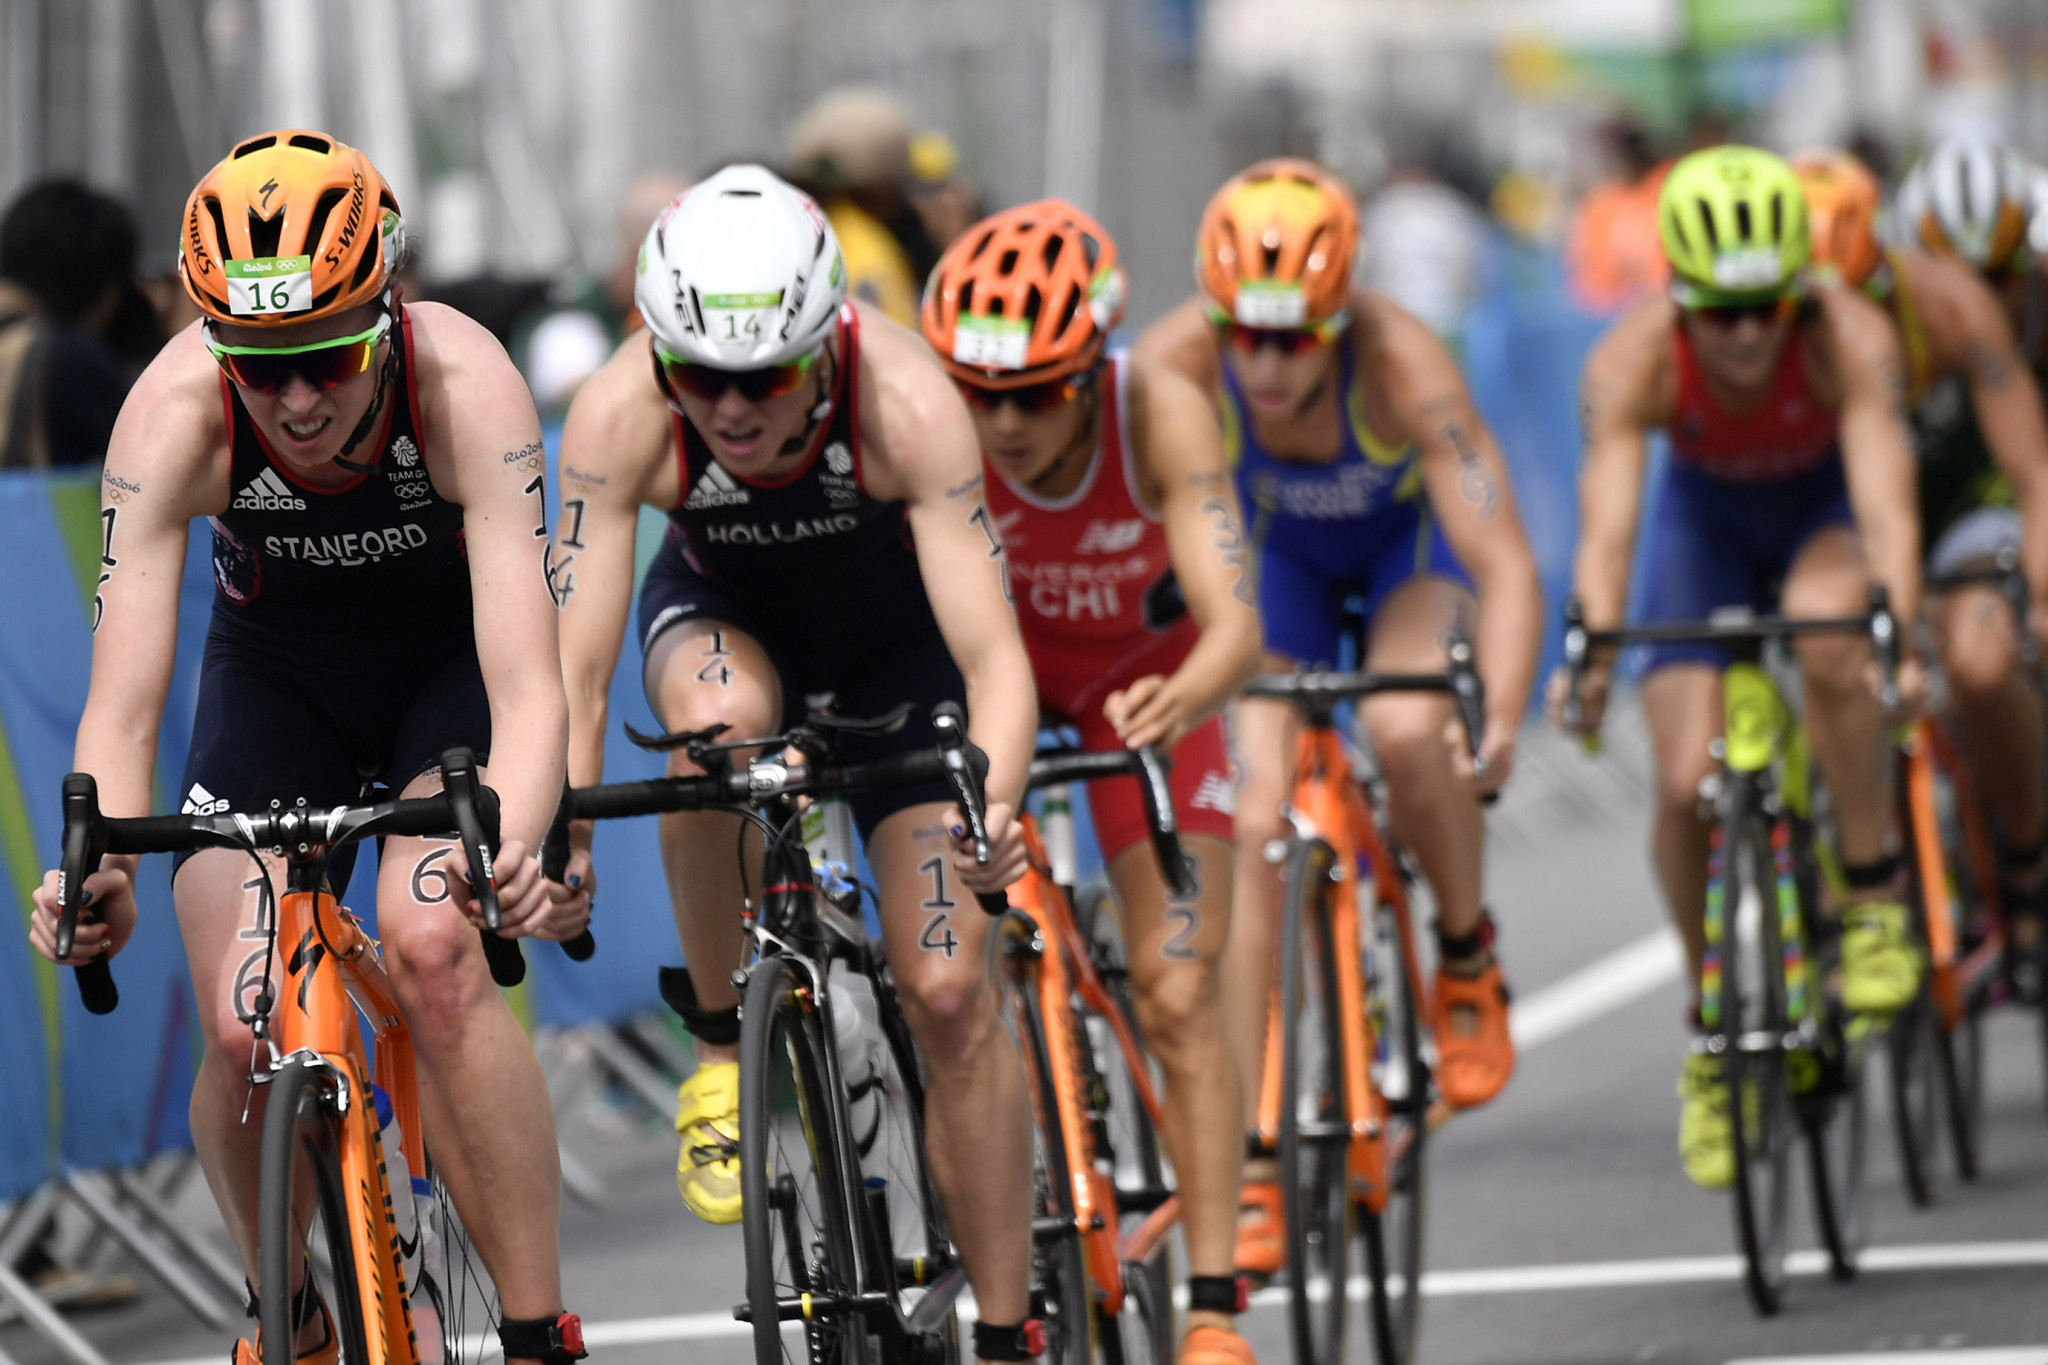 ITU makes history in announcing nearly half of Tokyo 2020 technical officials will be female